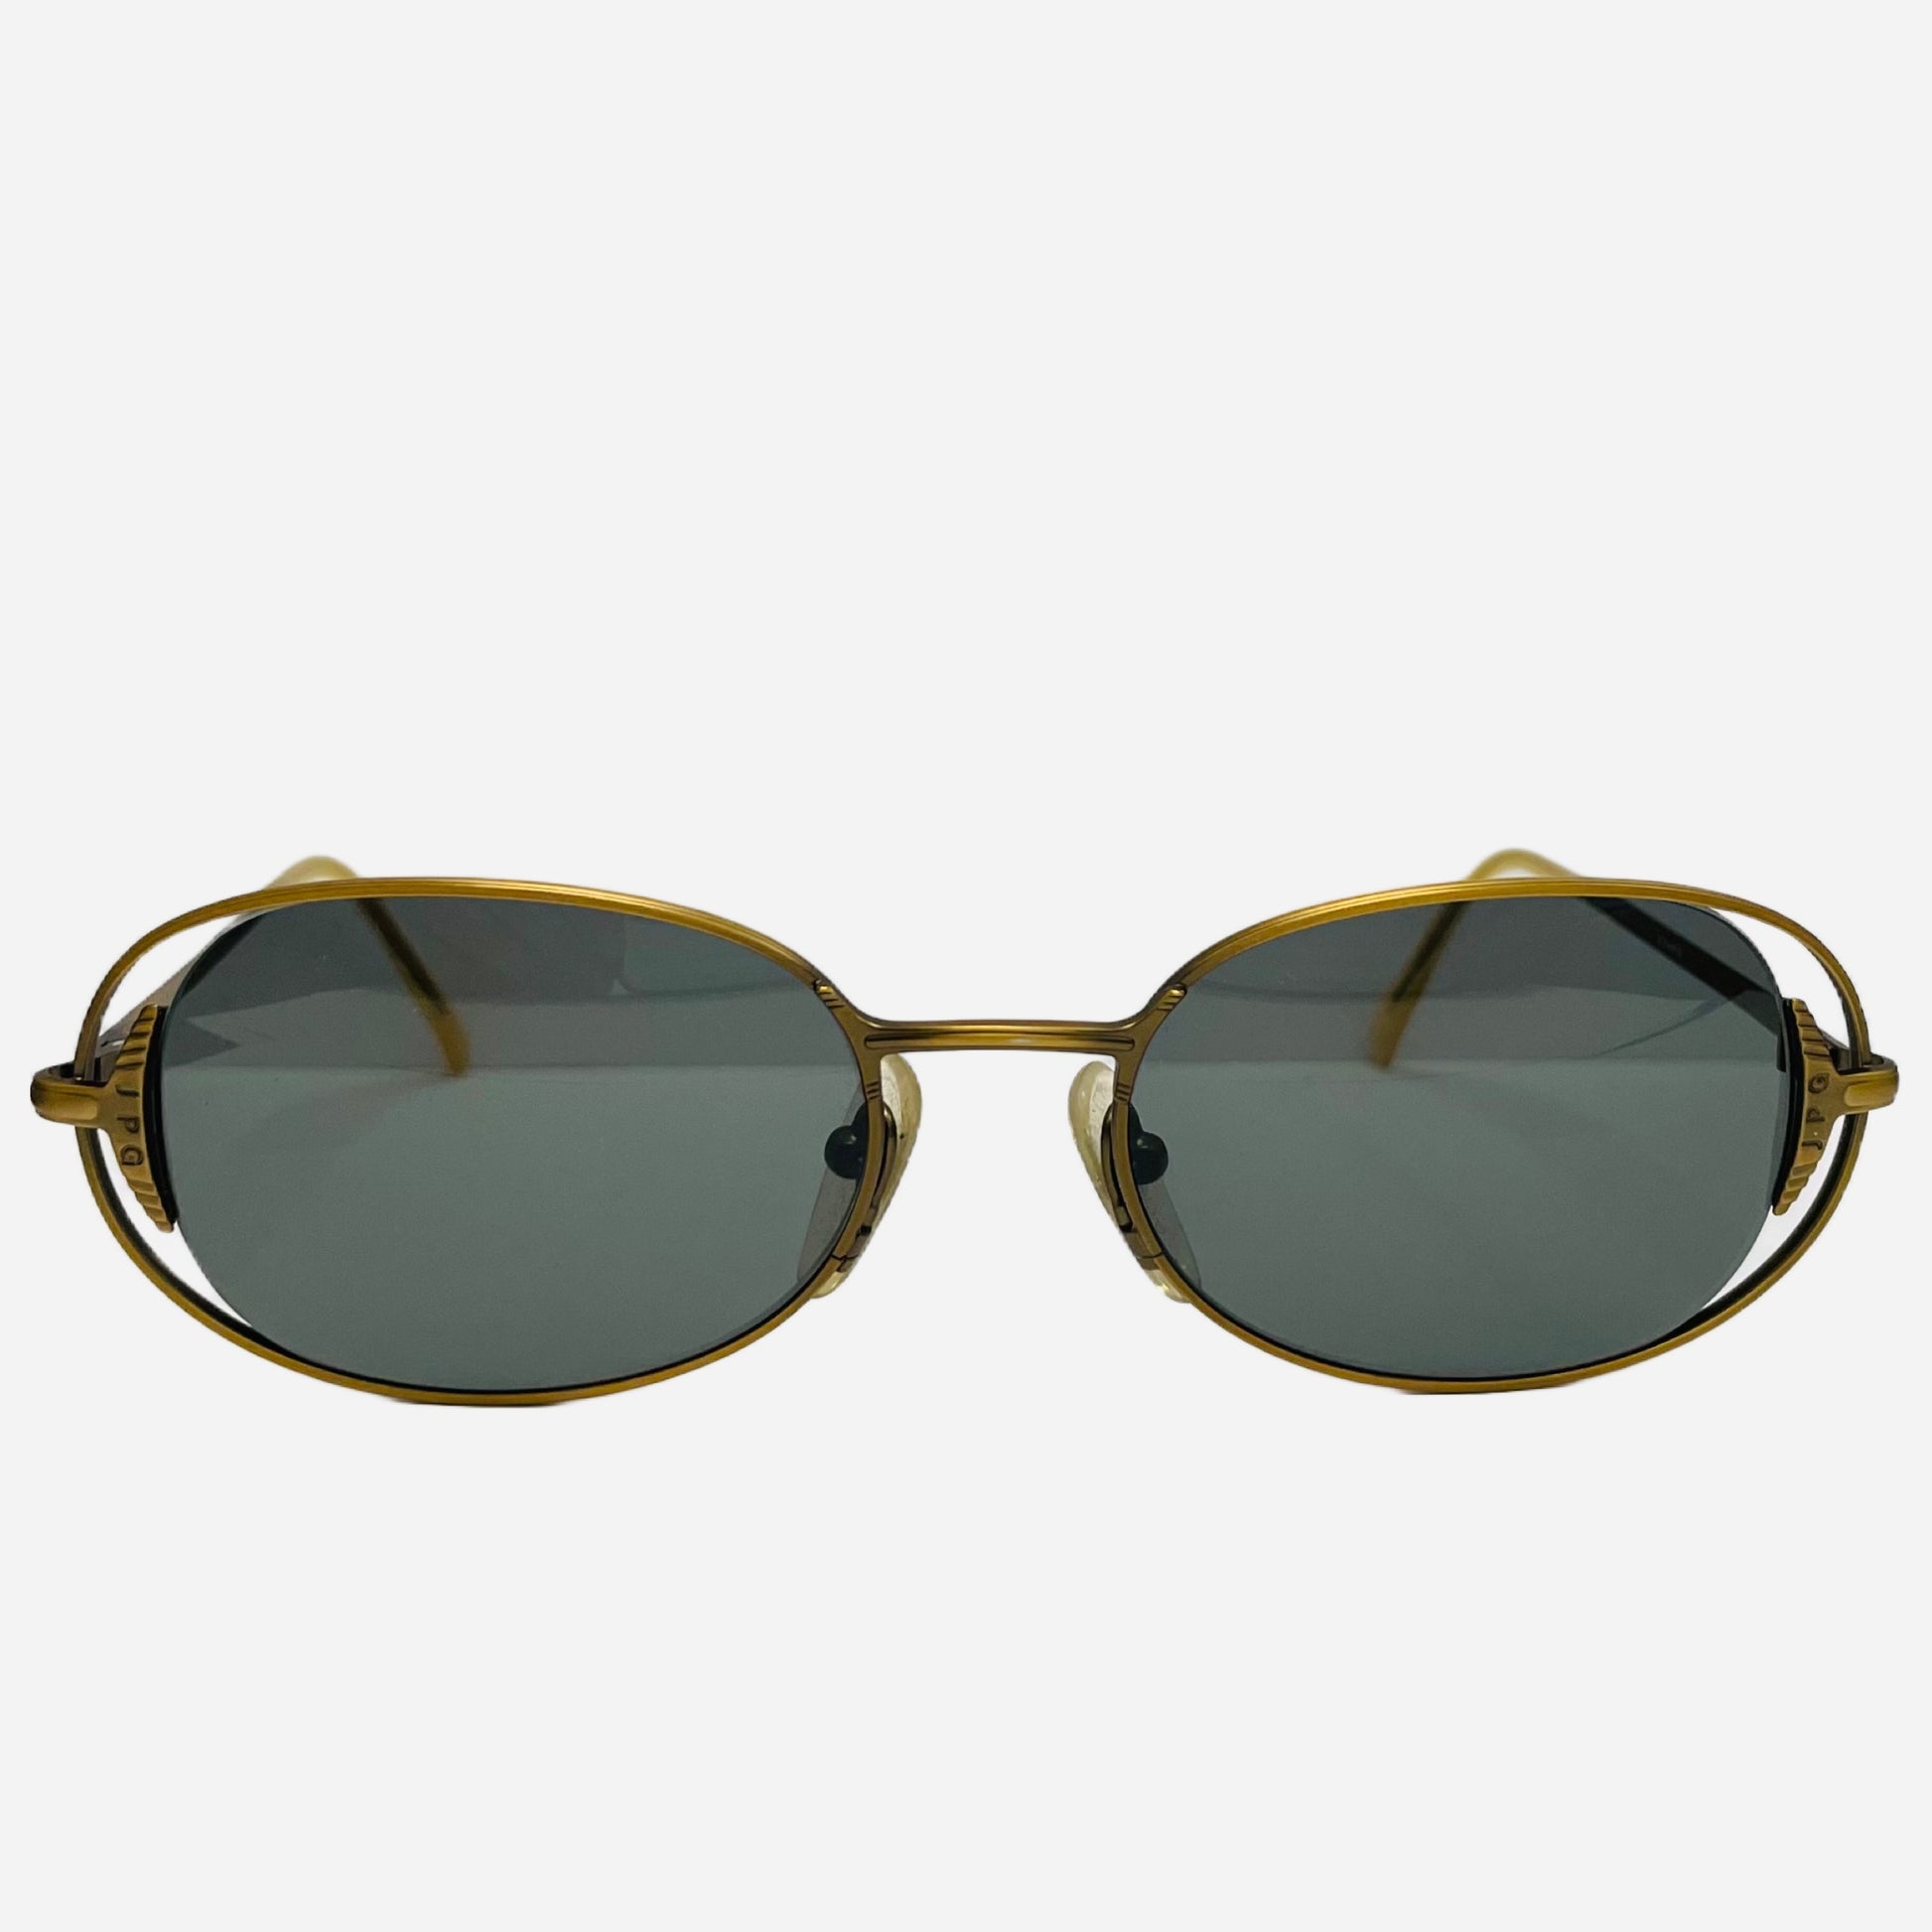 Vintage-Jean-Paul-Gaultier-Sonnenbrille-Sunglasses-Model56-3172-made-in-japan-the-seekers-front-2